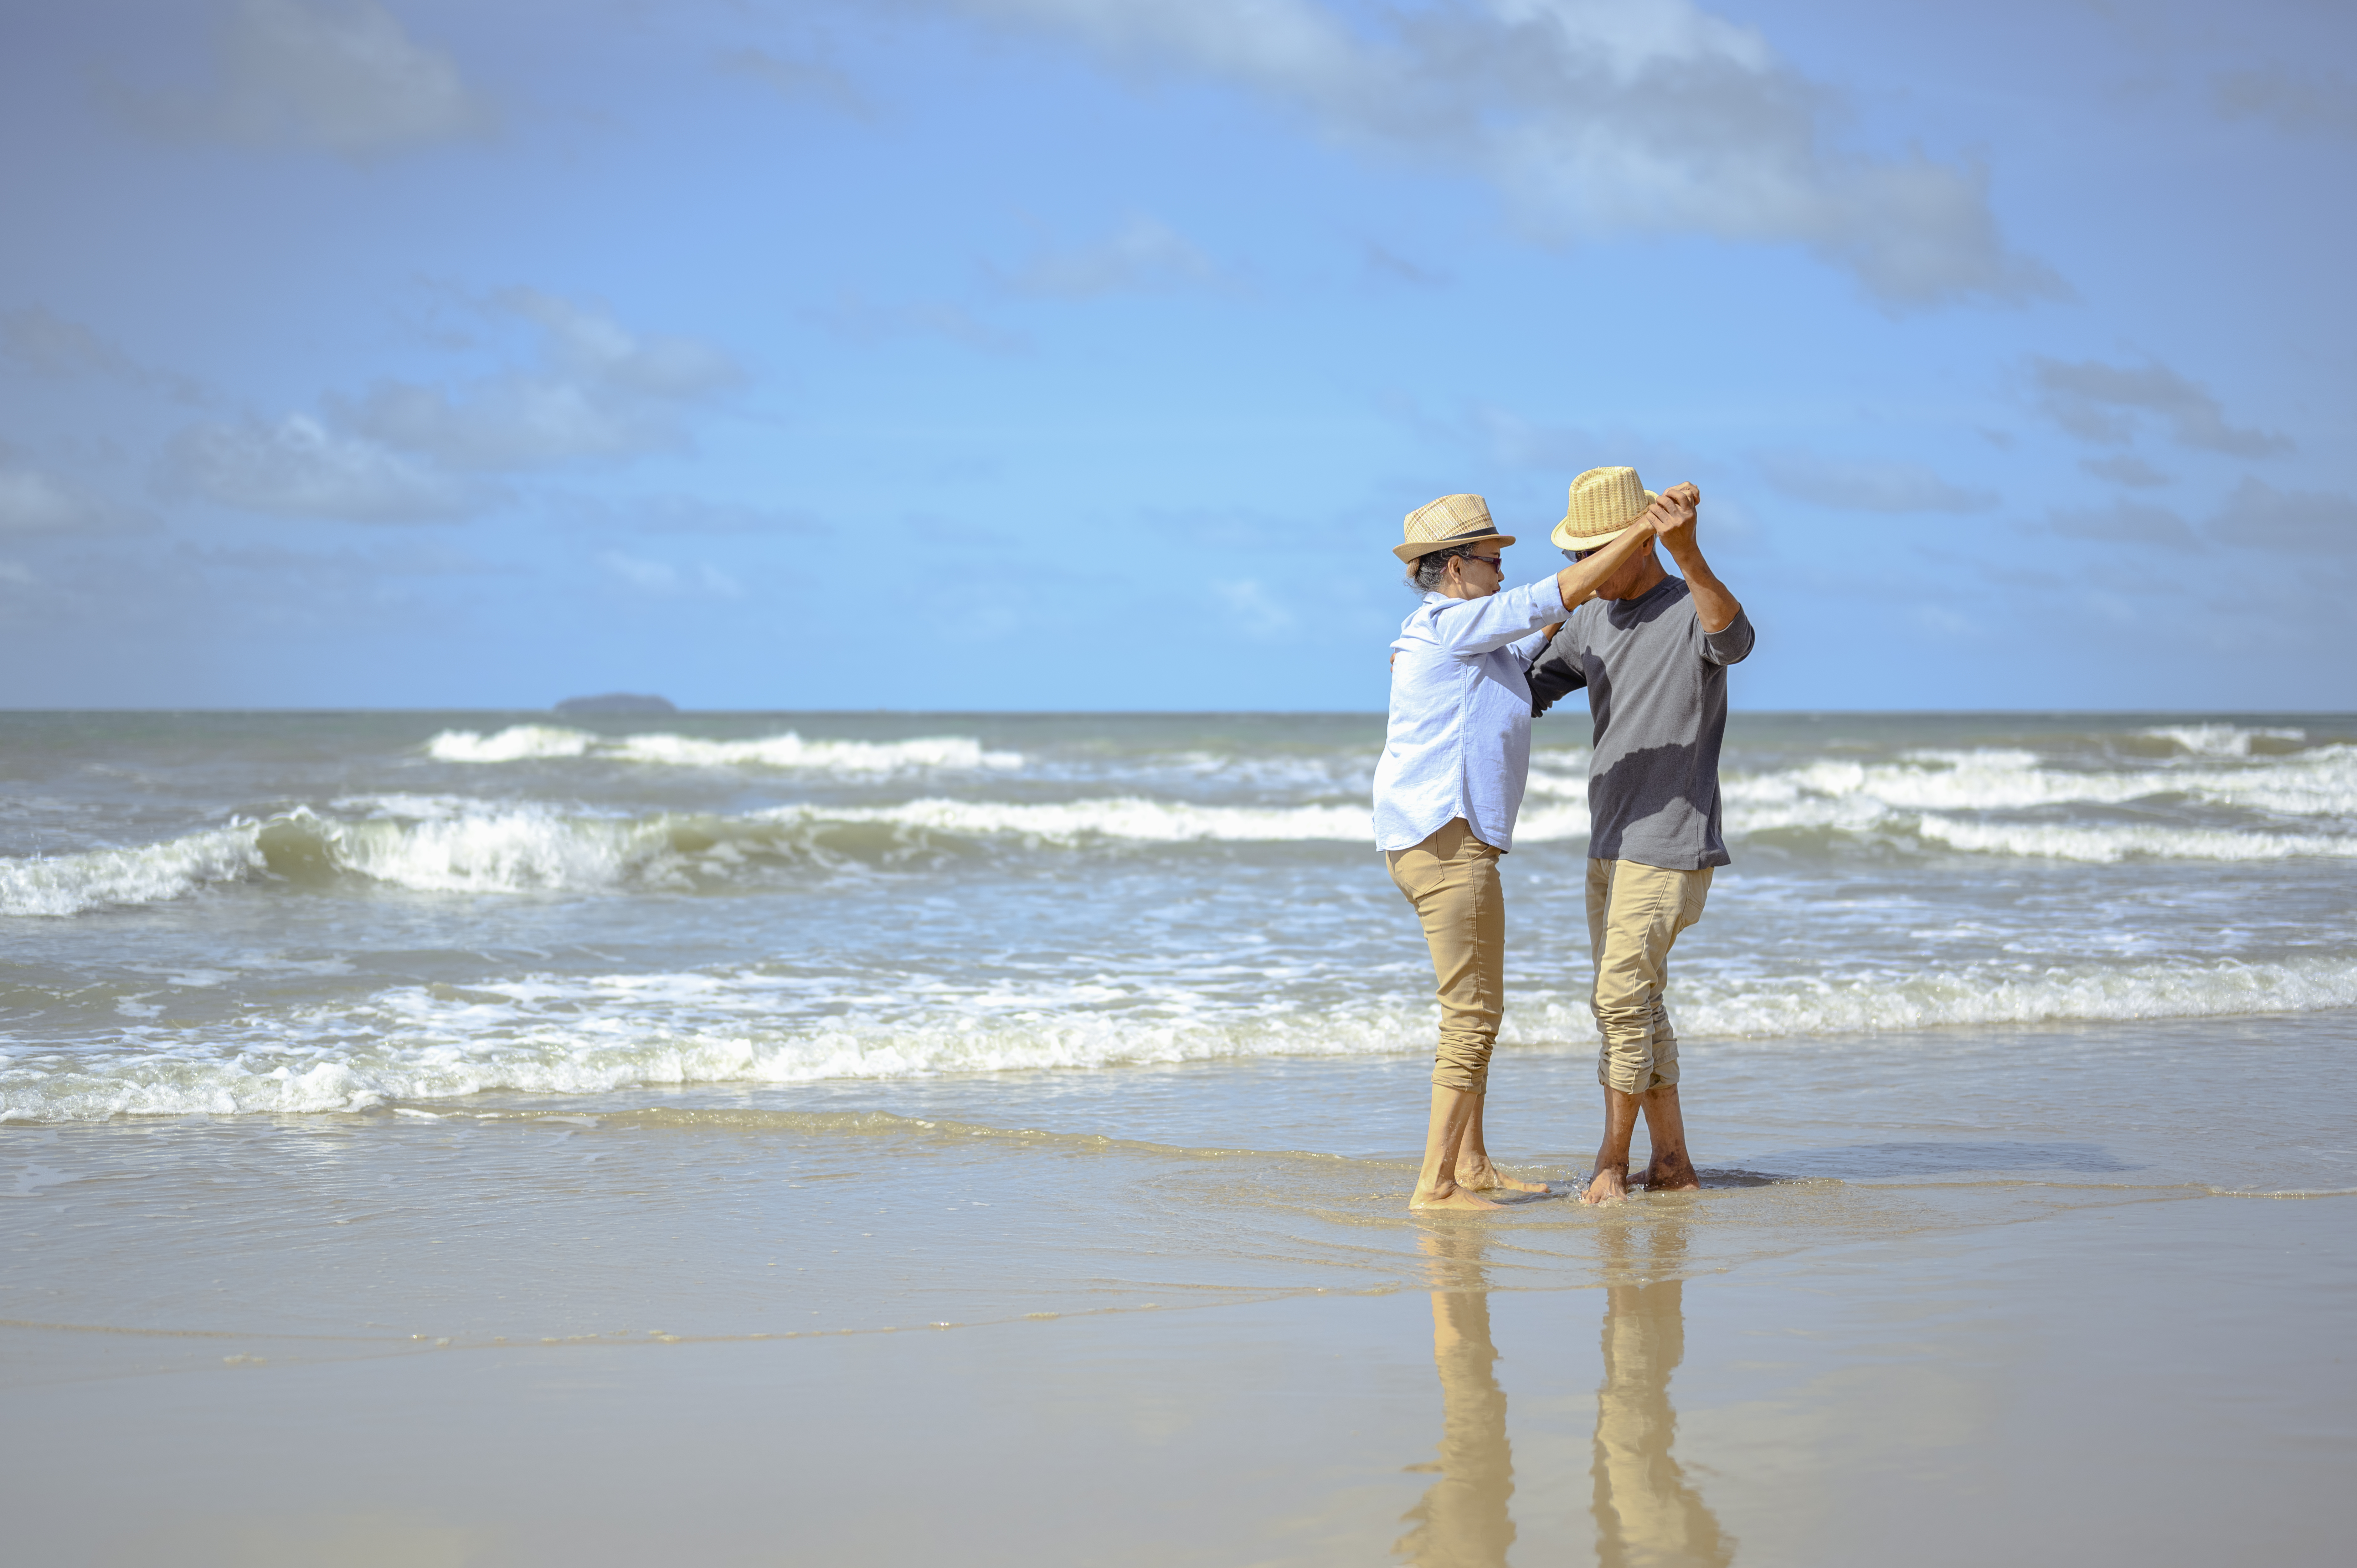 Senior couple dancing on the beach on good days, plan life insurance at retirement concept.